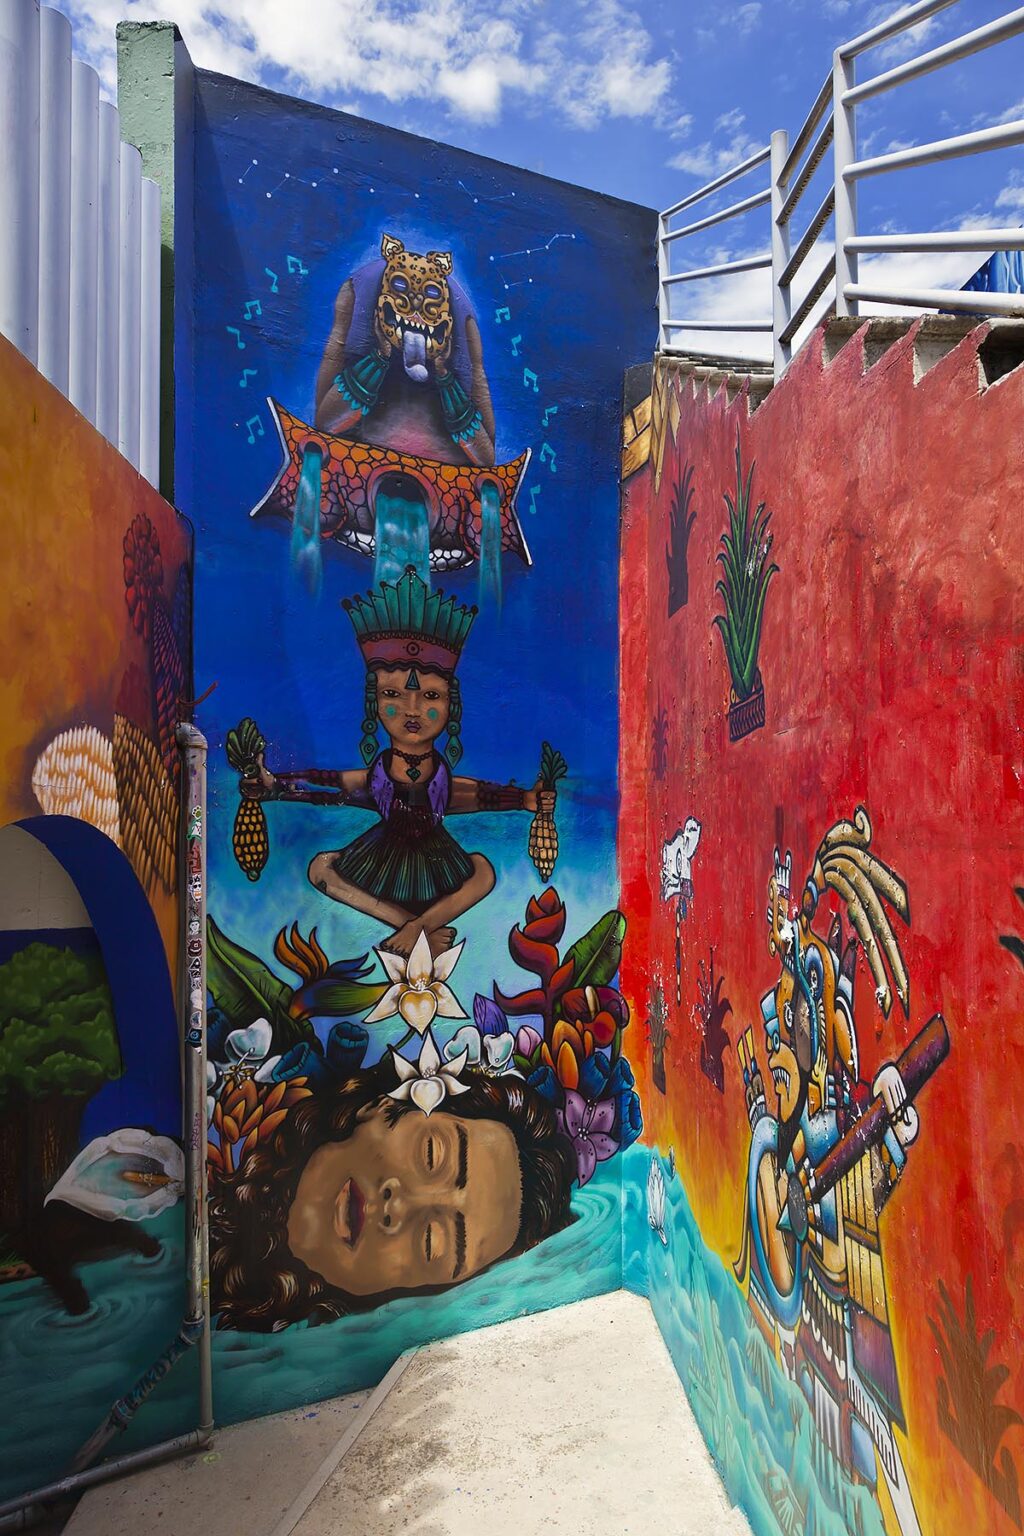 WALL MURALS are an important form of art in OAXACA, MEXICO